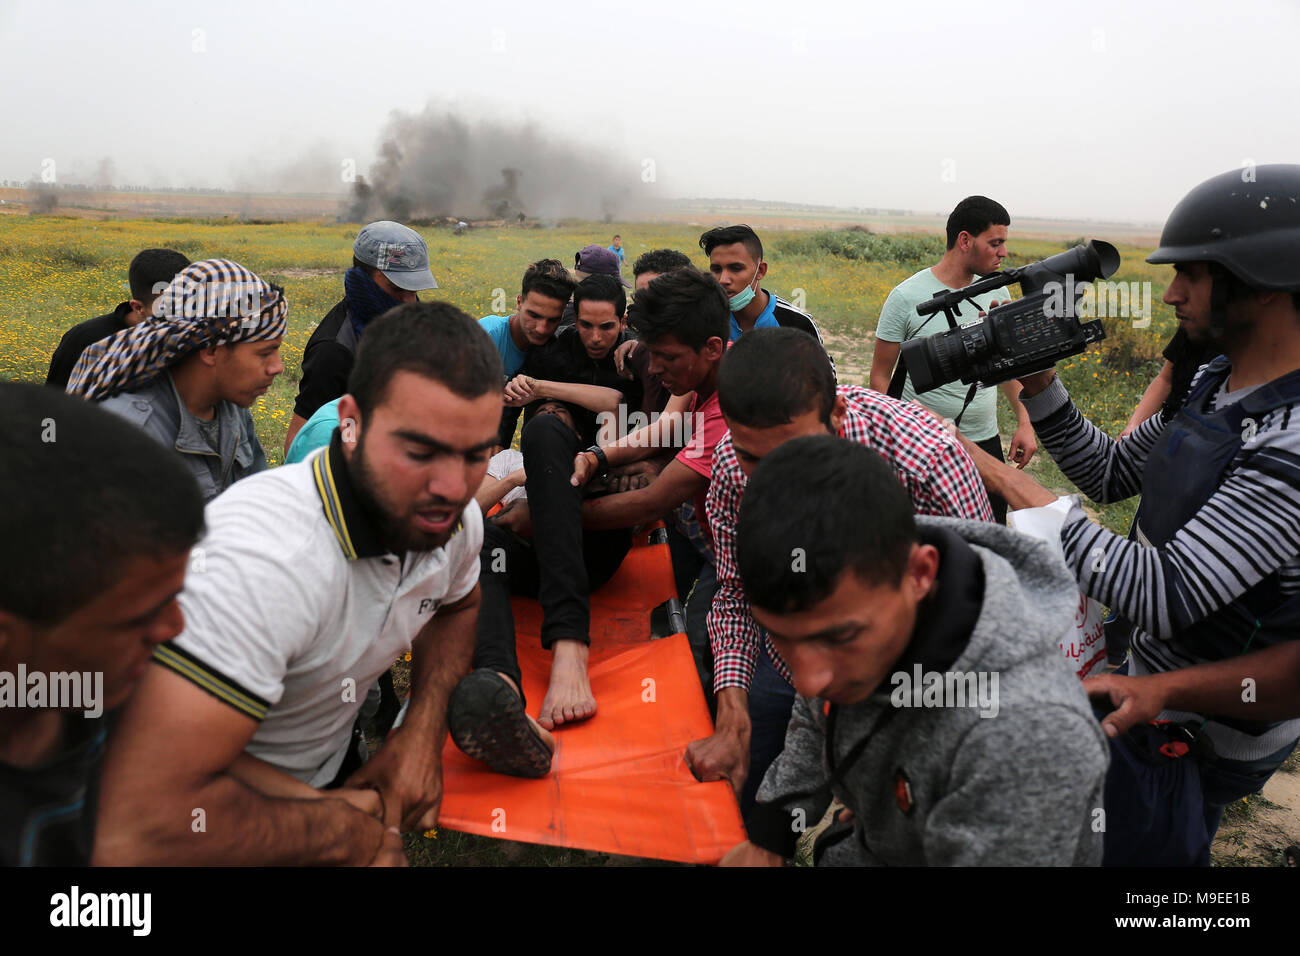 Gaza, Palestinian territories. 23rd march, 2018.   Palestinian men help evacuate an injured protester during clashes with Israeli troops near Khan Yun Stock Photo